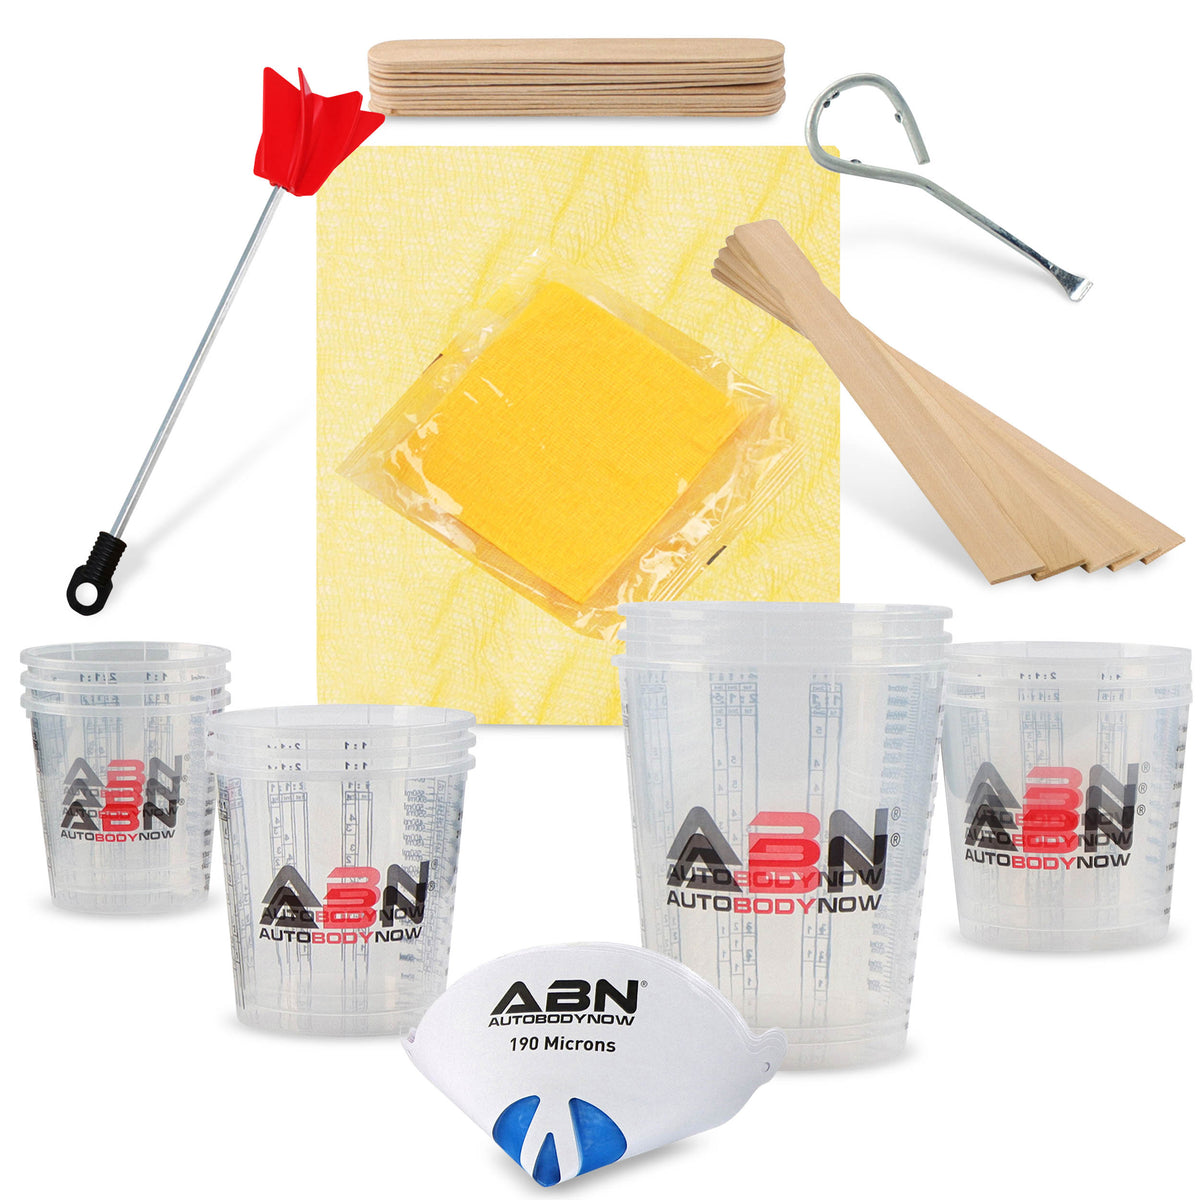 Home and Automotive Paint Mixing Cups Kit - 40pc Full Epoxy Mixer Set